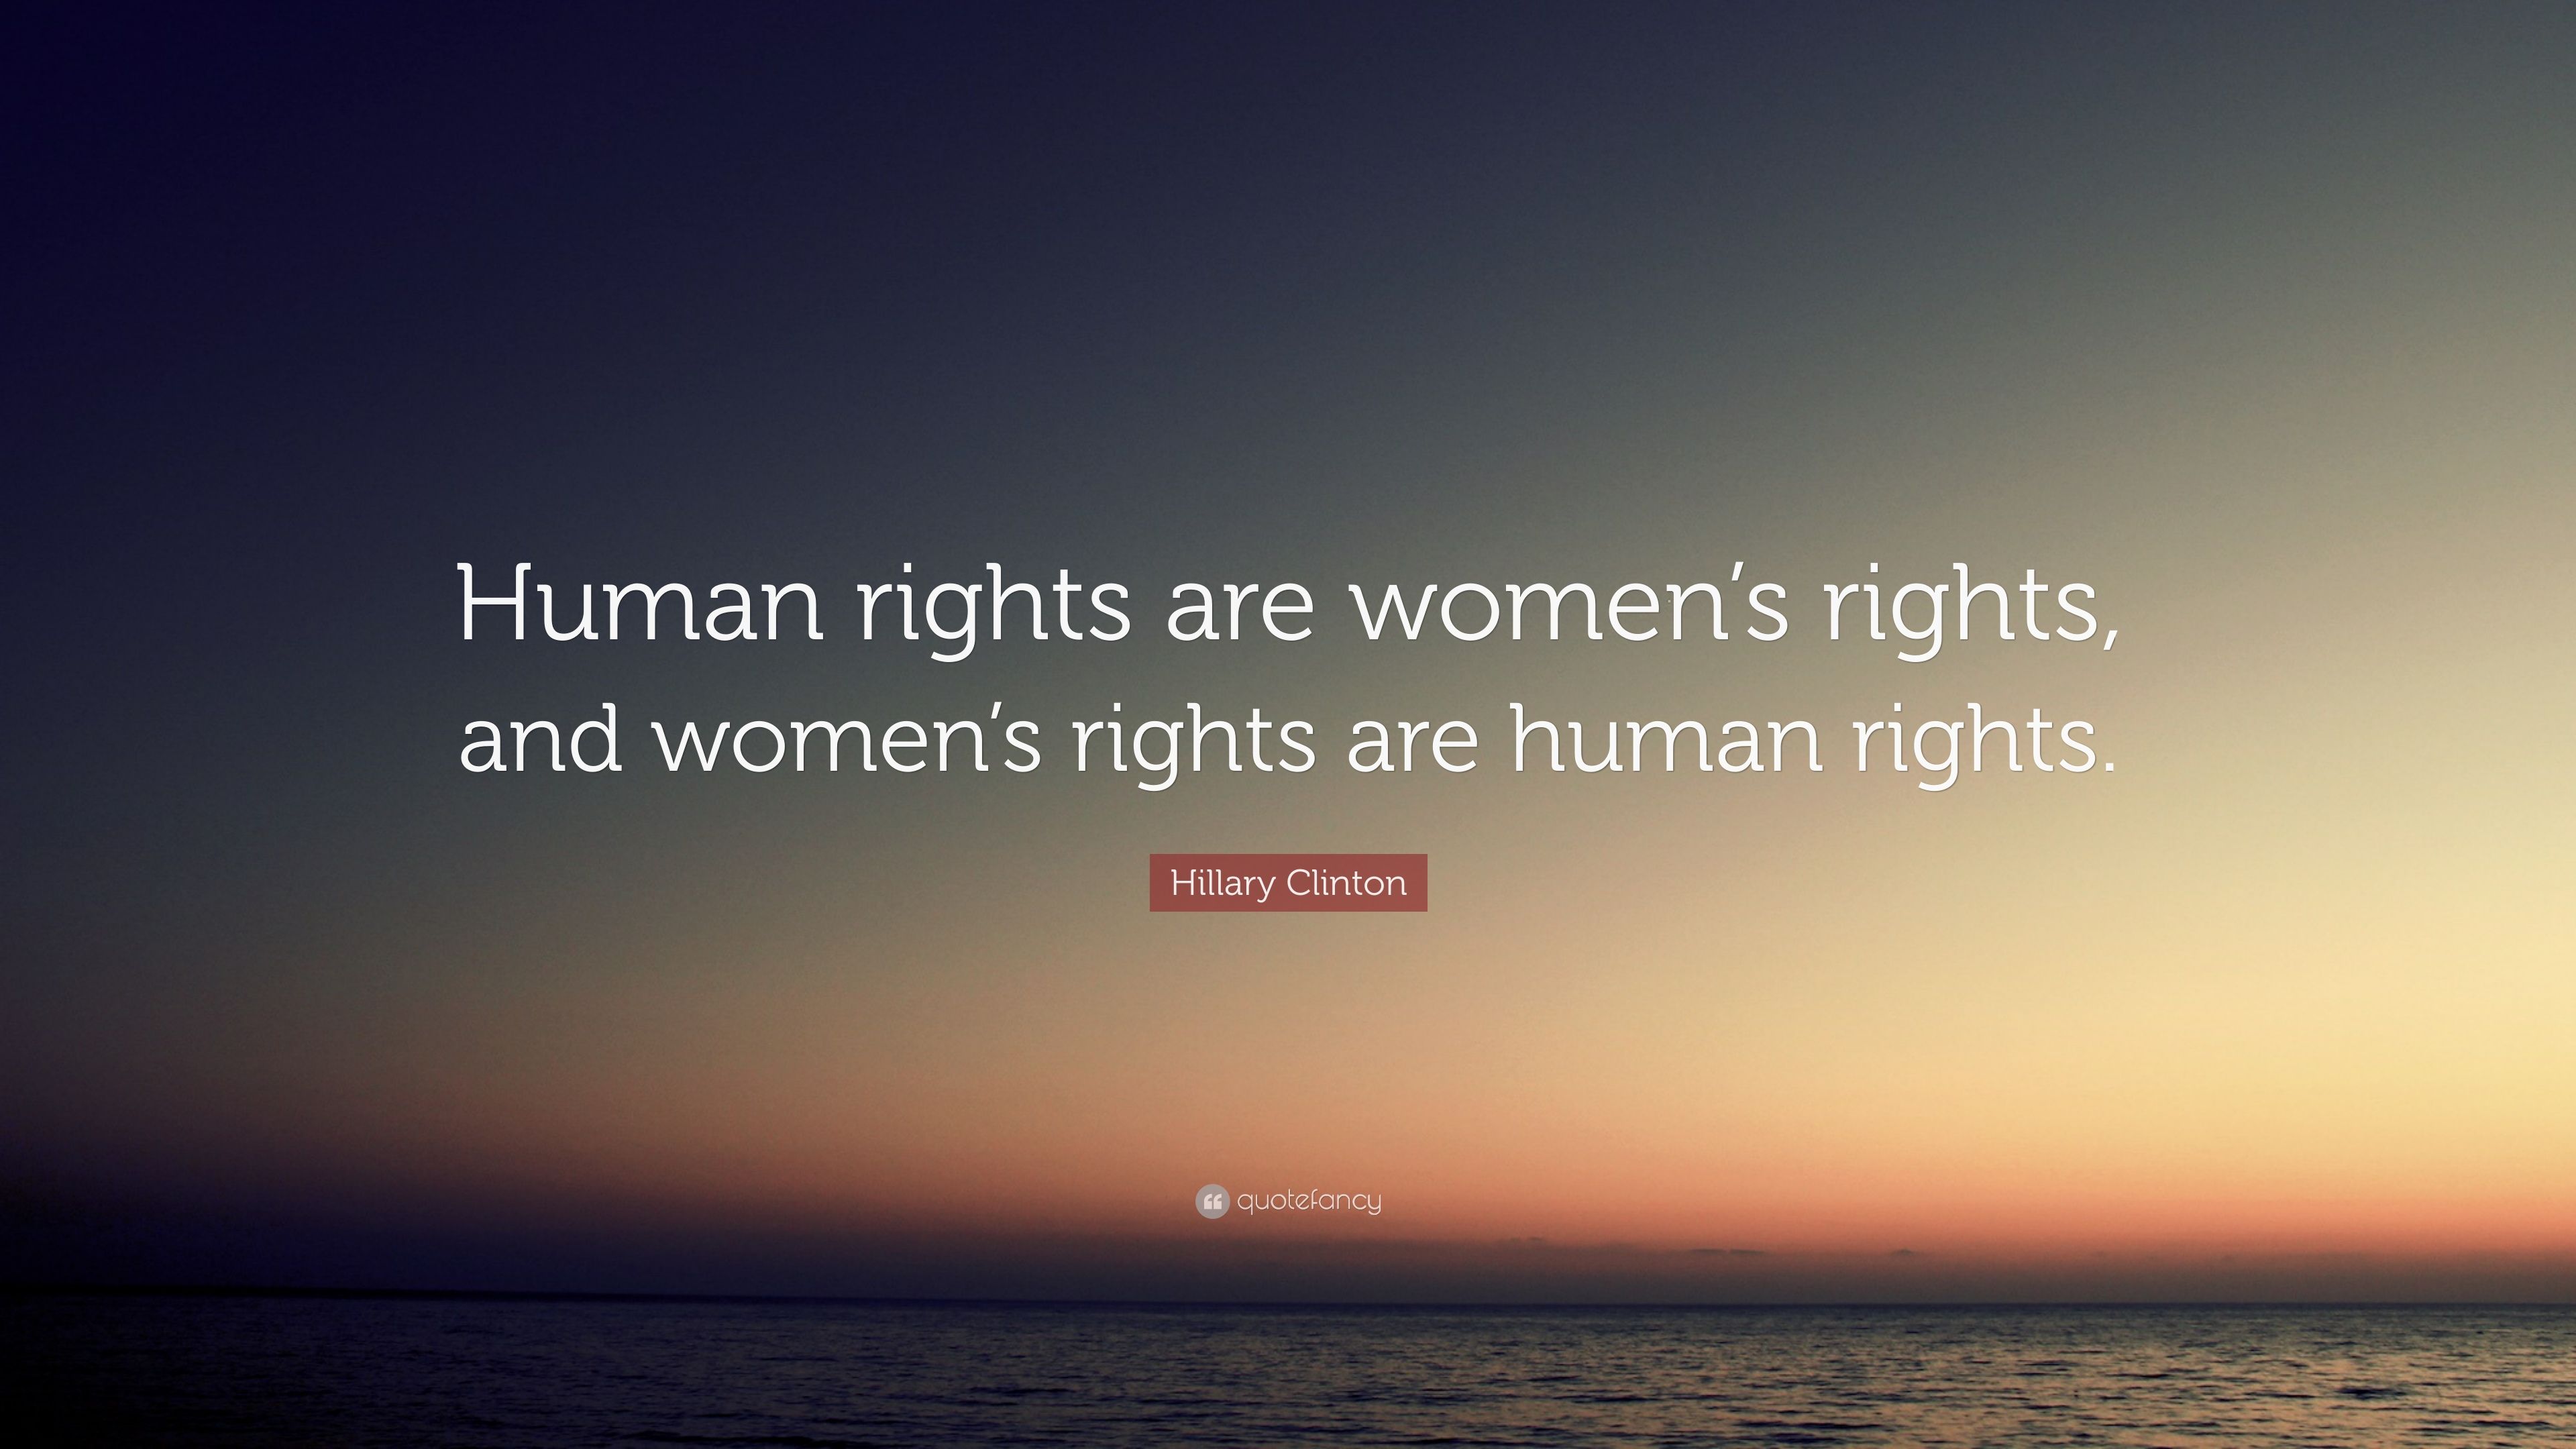 Hillary Clinton Quote: “Human rights are women's rights